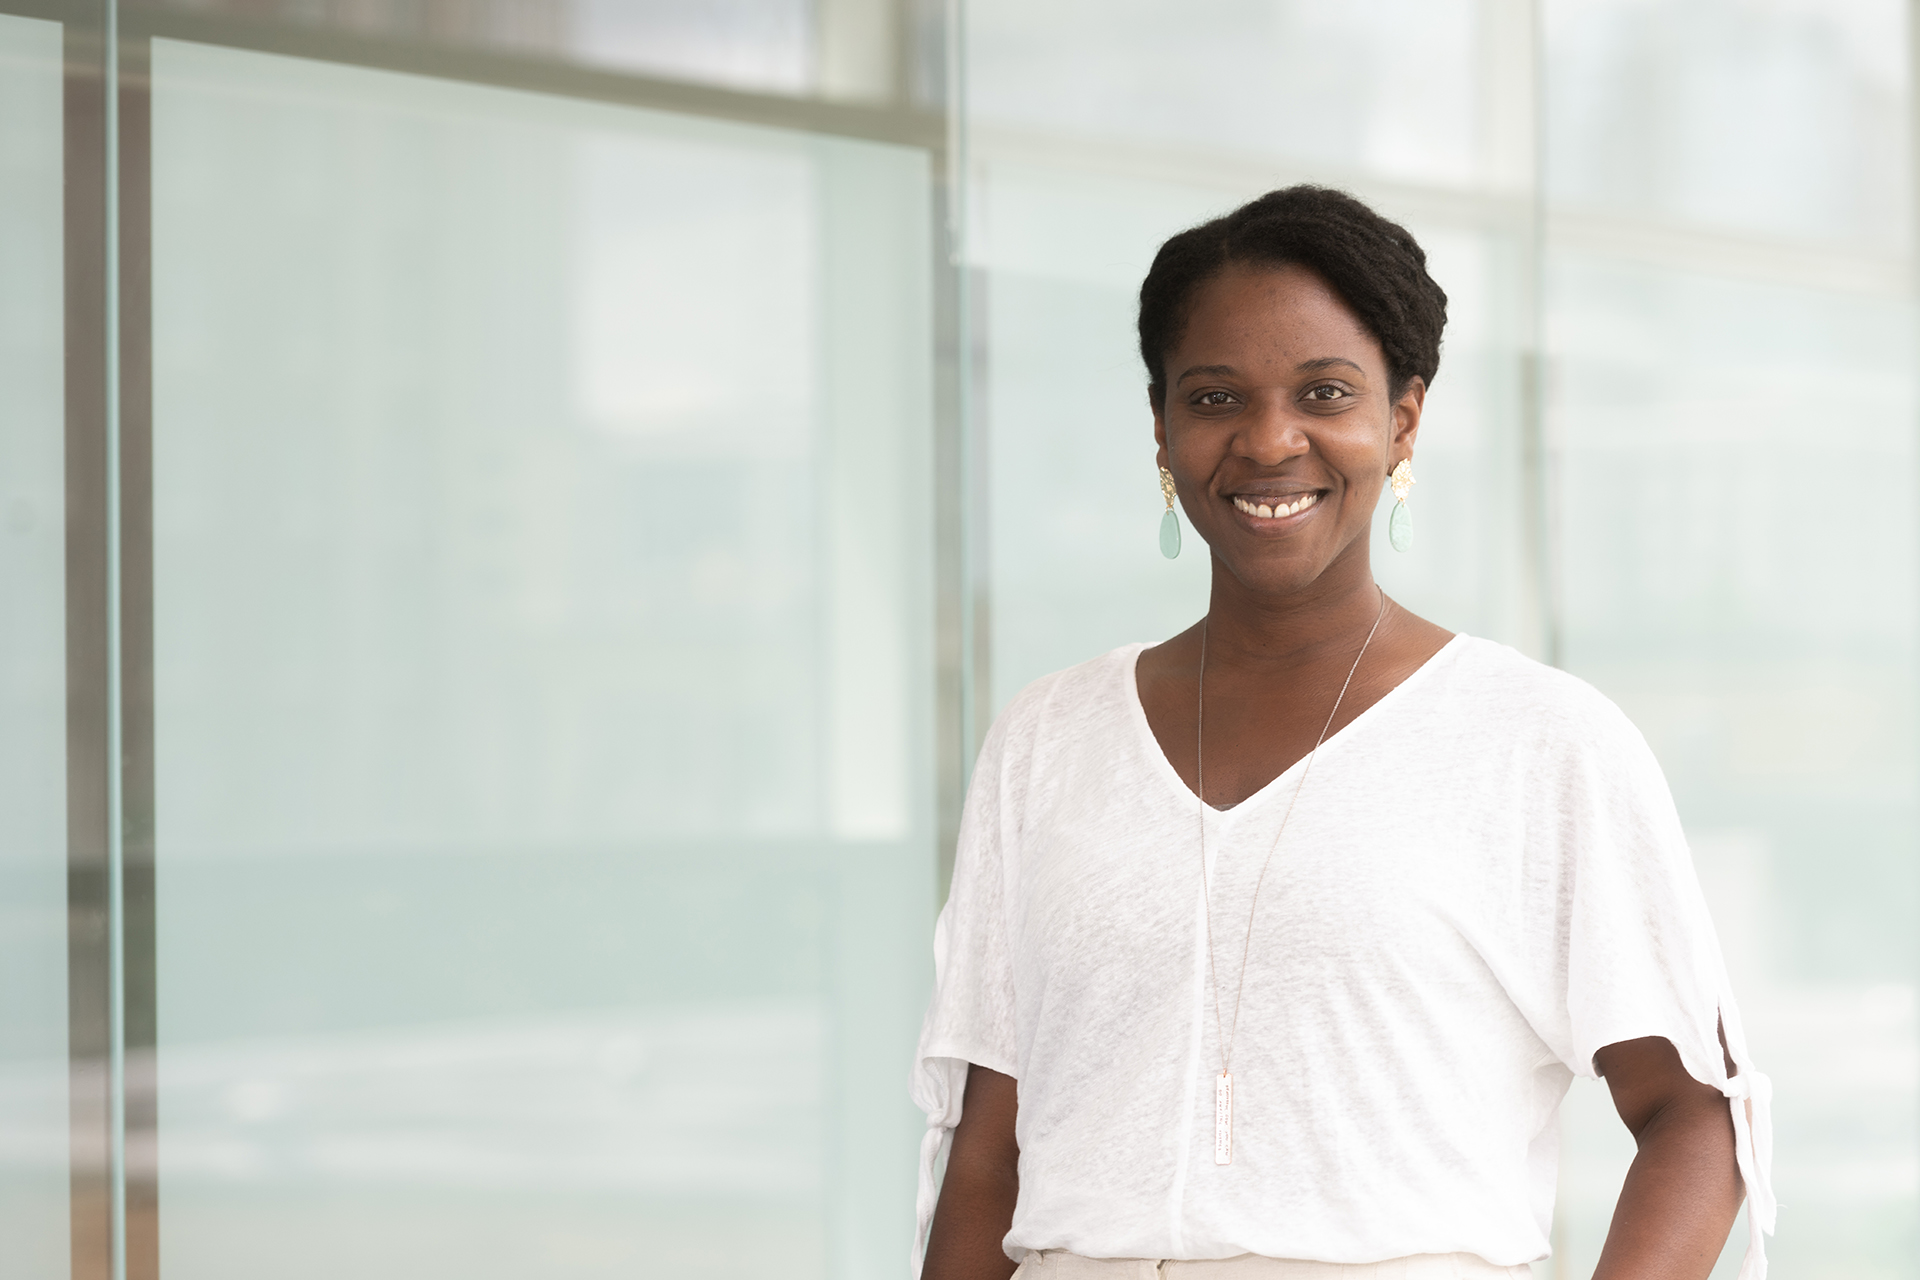 Tiffany D. Johnson, assistant professor in the Organizational Behavior Area in the Scheller College of Business